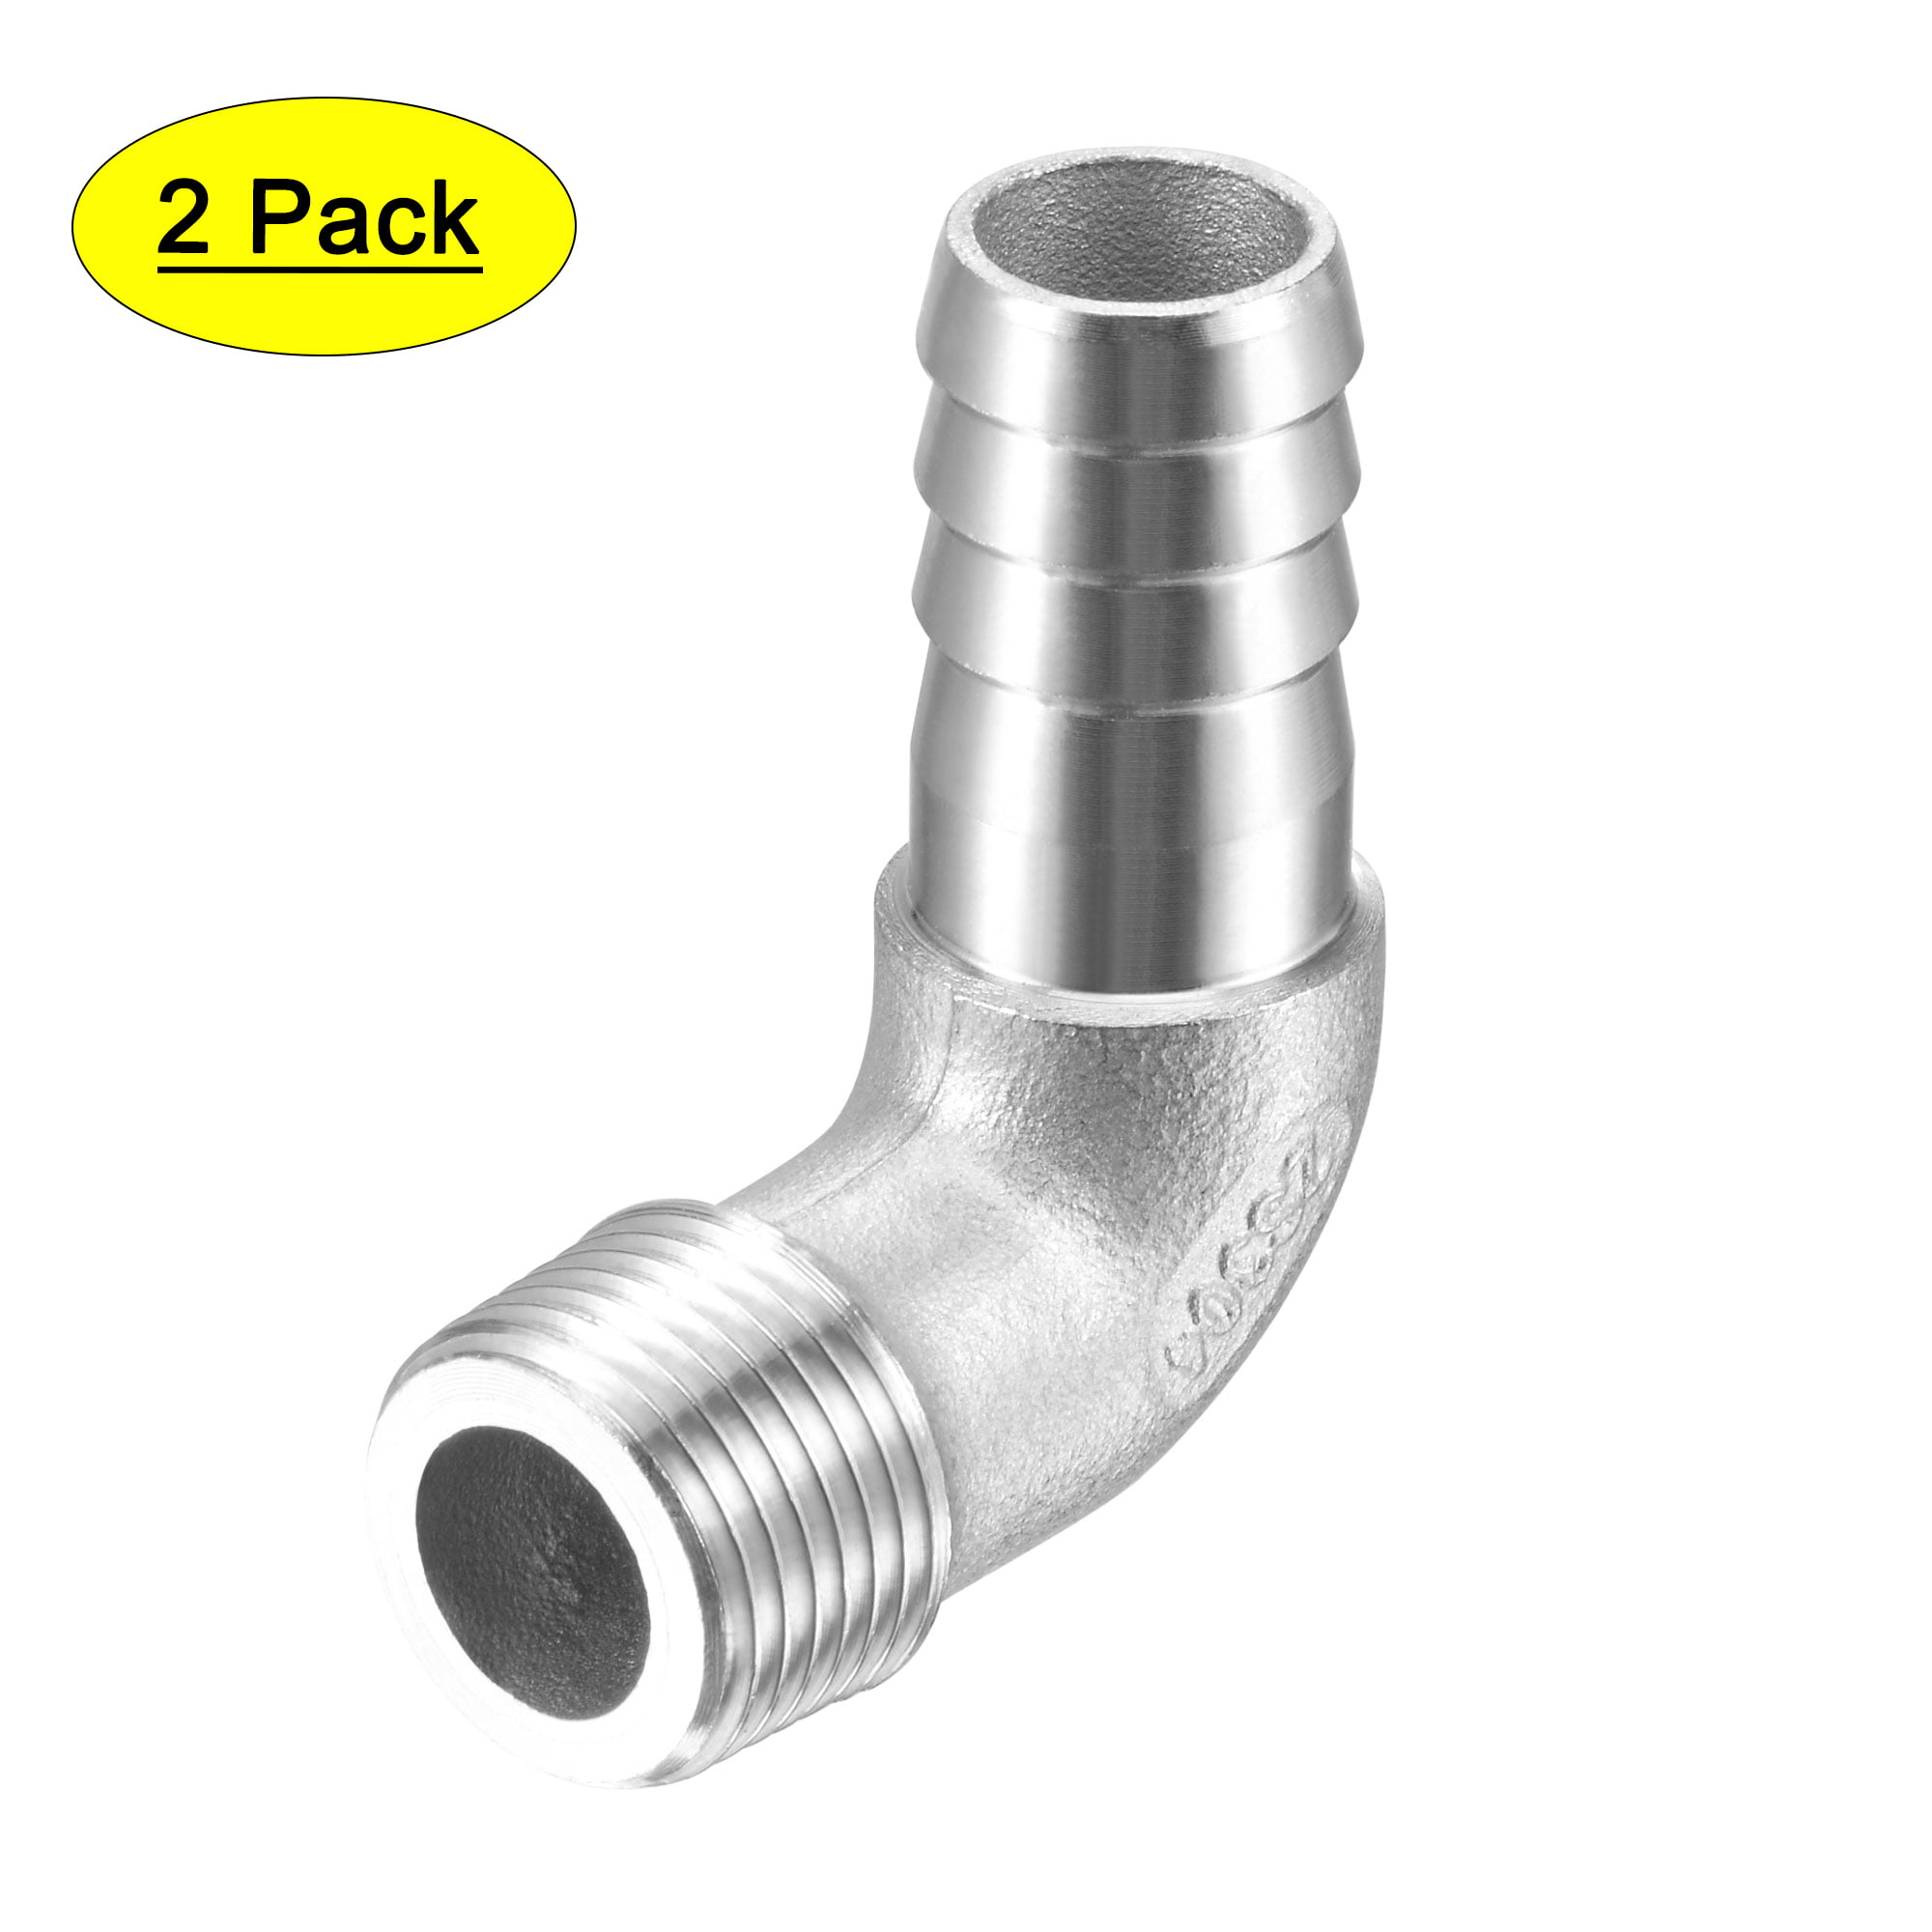 WATER AIR FUEL CONNECTOR. 2 x 14mm ELBOW BARBED PLASTIC HOSE JOINER 